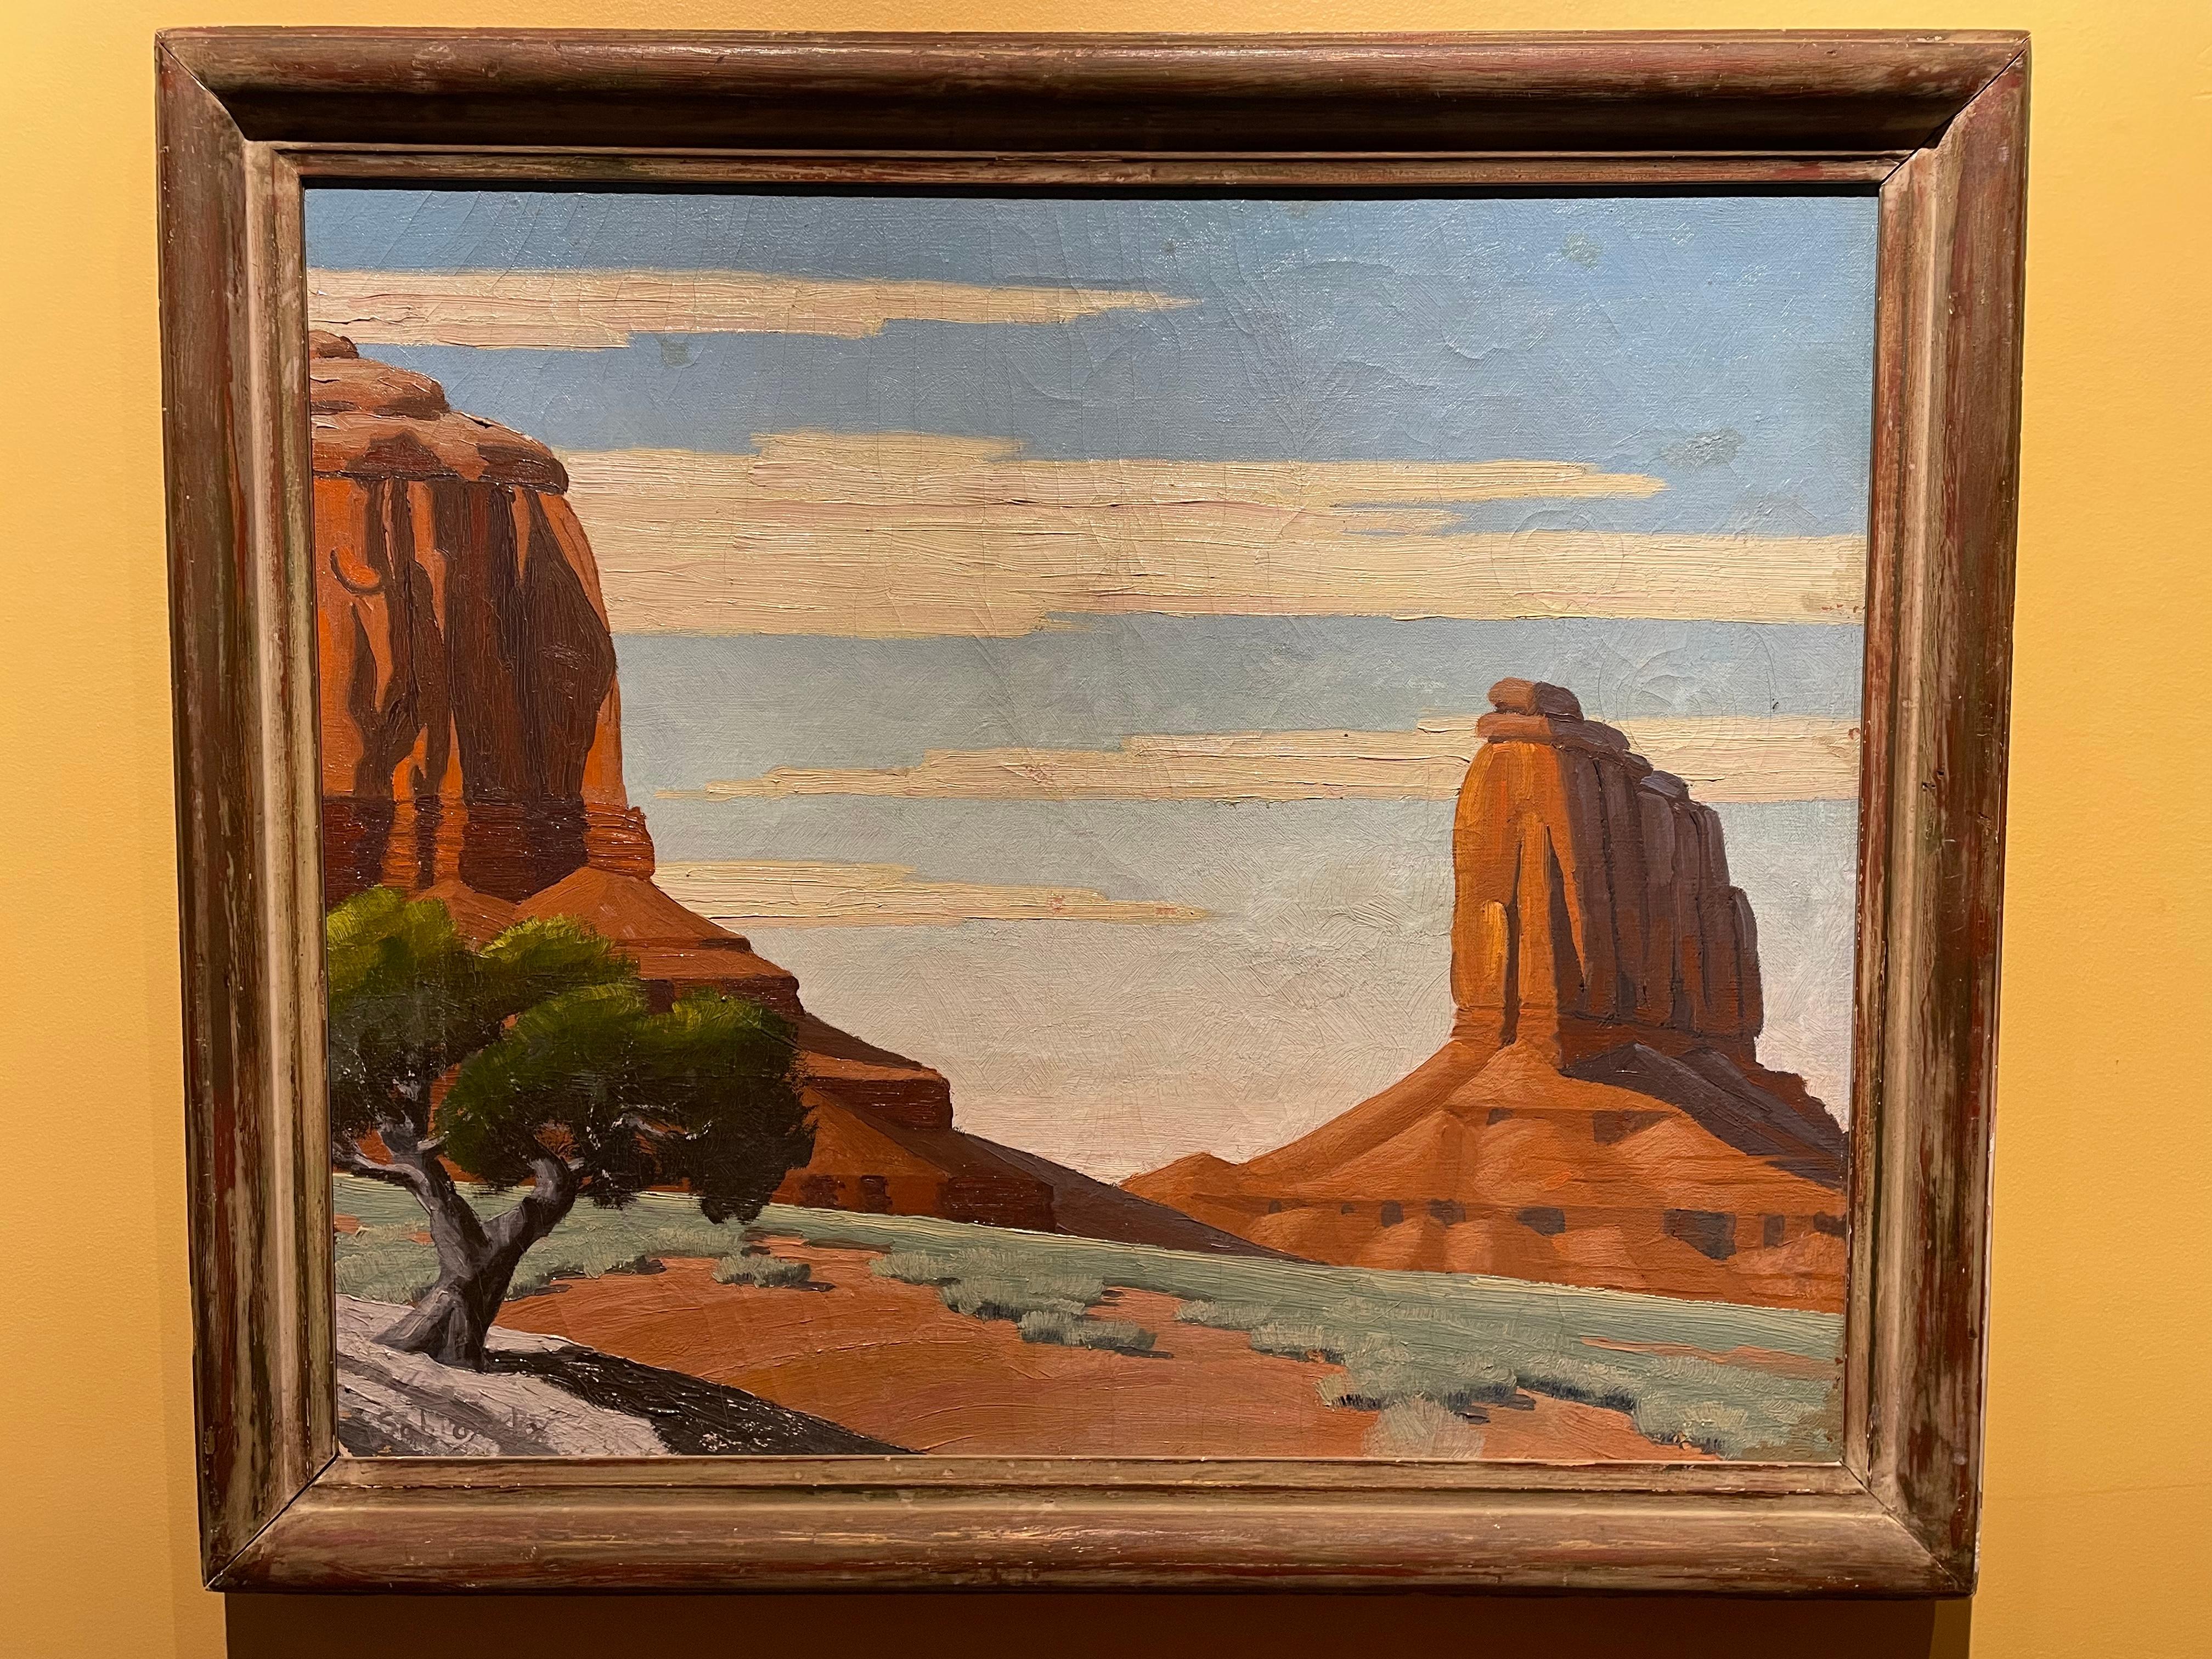 Although born in Ohio at the end of the 19th century, Martin Sabransky studied art at Randolph Macon College in Virginia. He began his career path moving west, by first going to Kansas City before traveling further to Los Angeles by 1920.  He became